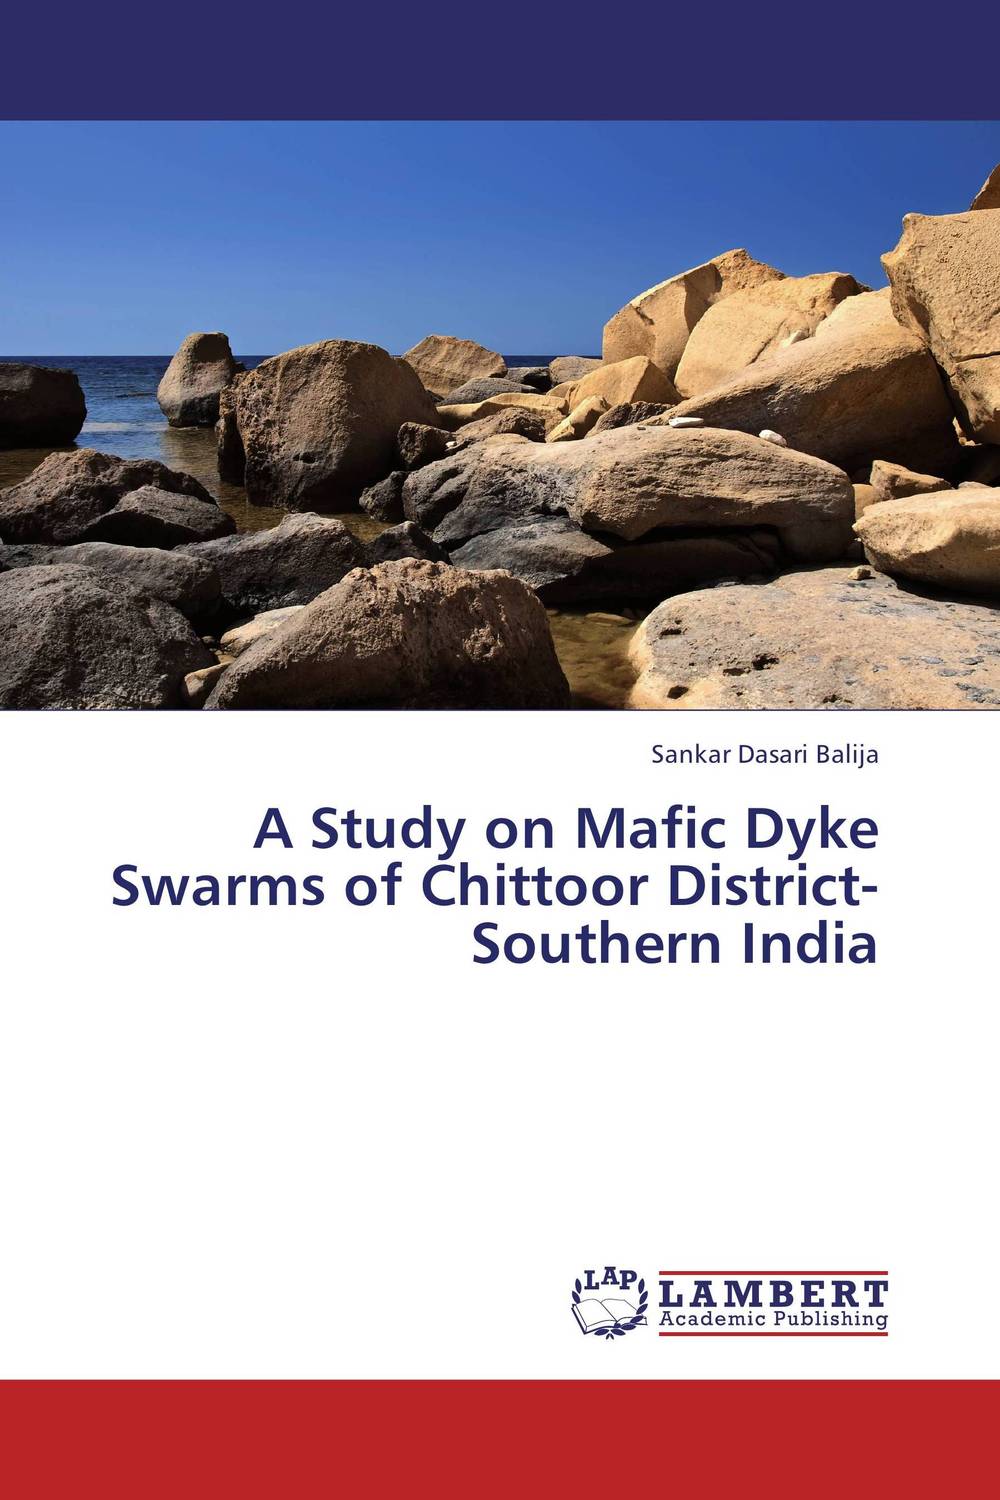 A Study on Mafic Dyke Swarms of Chittoor District- Southern India